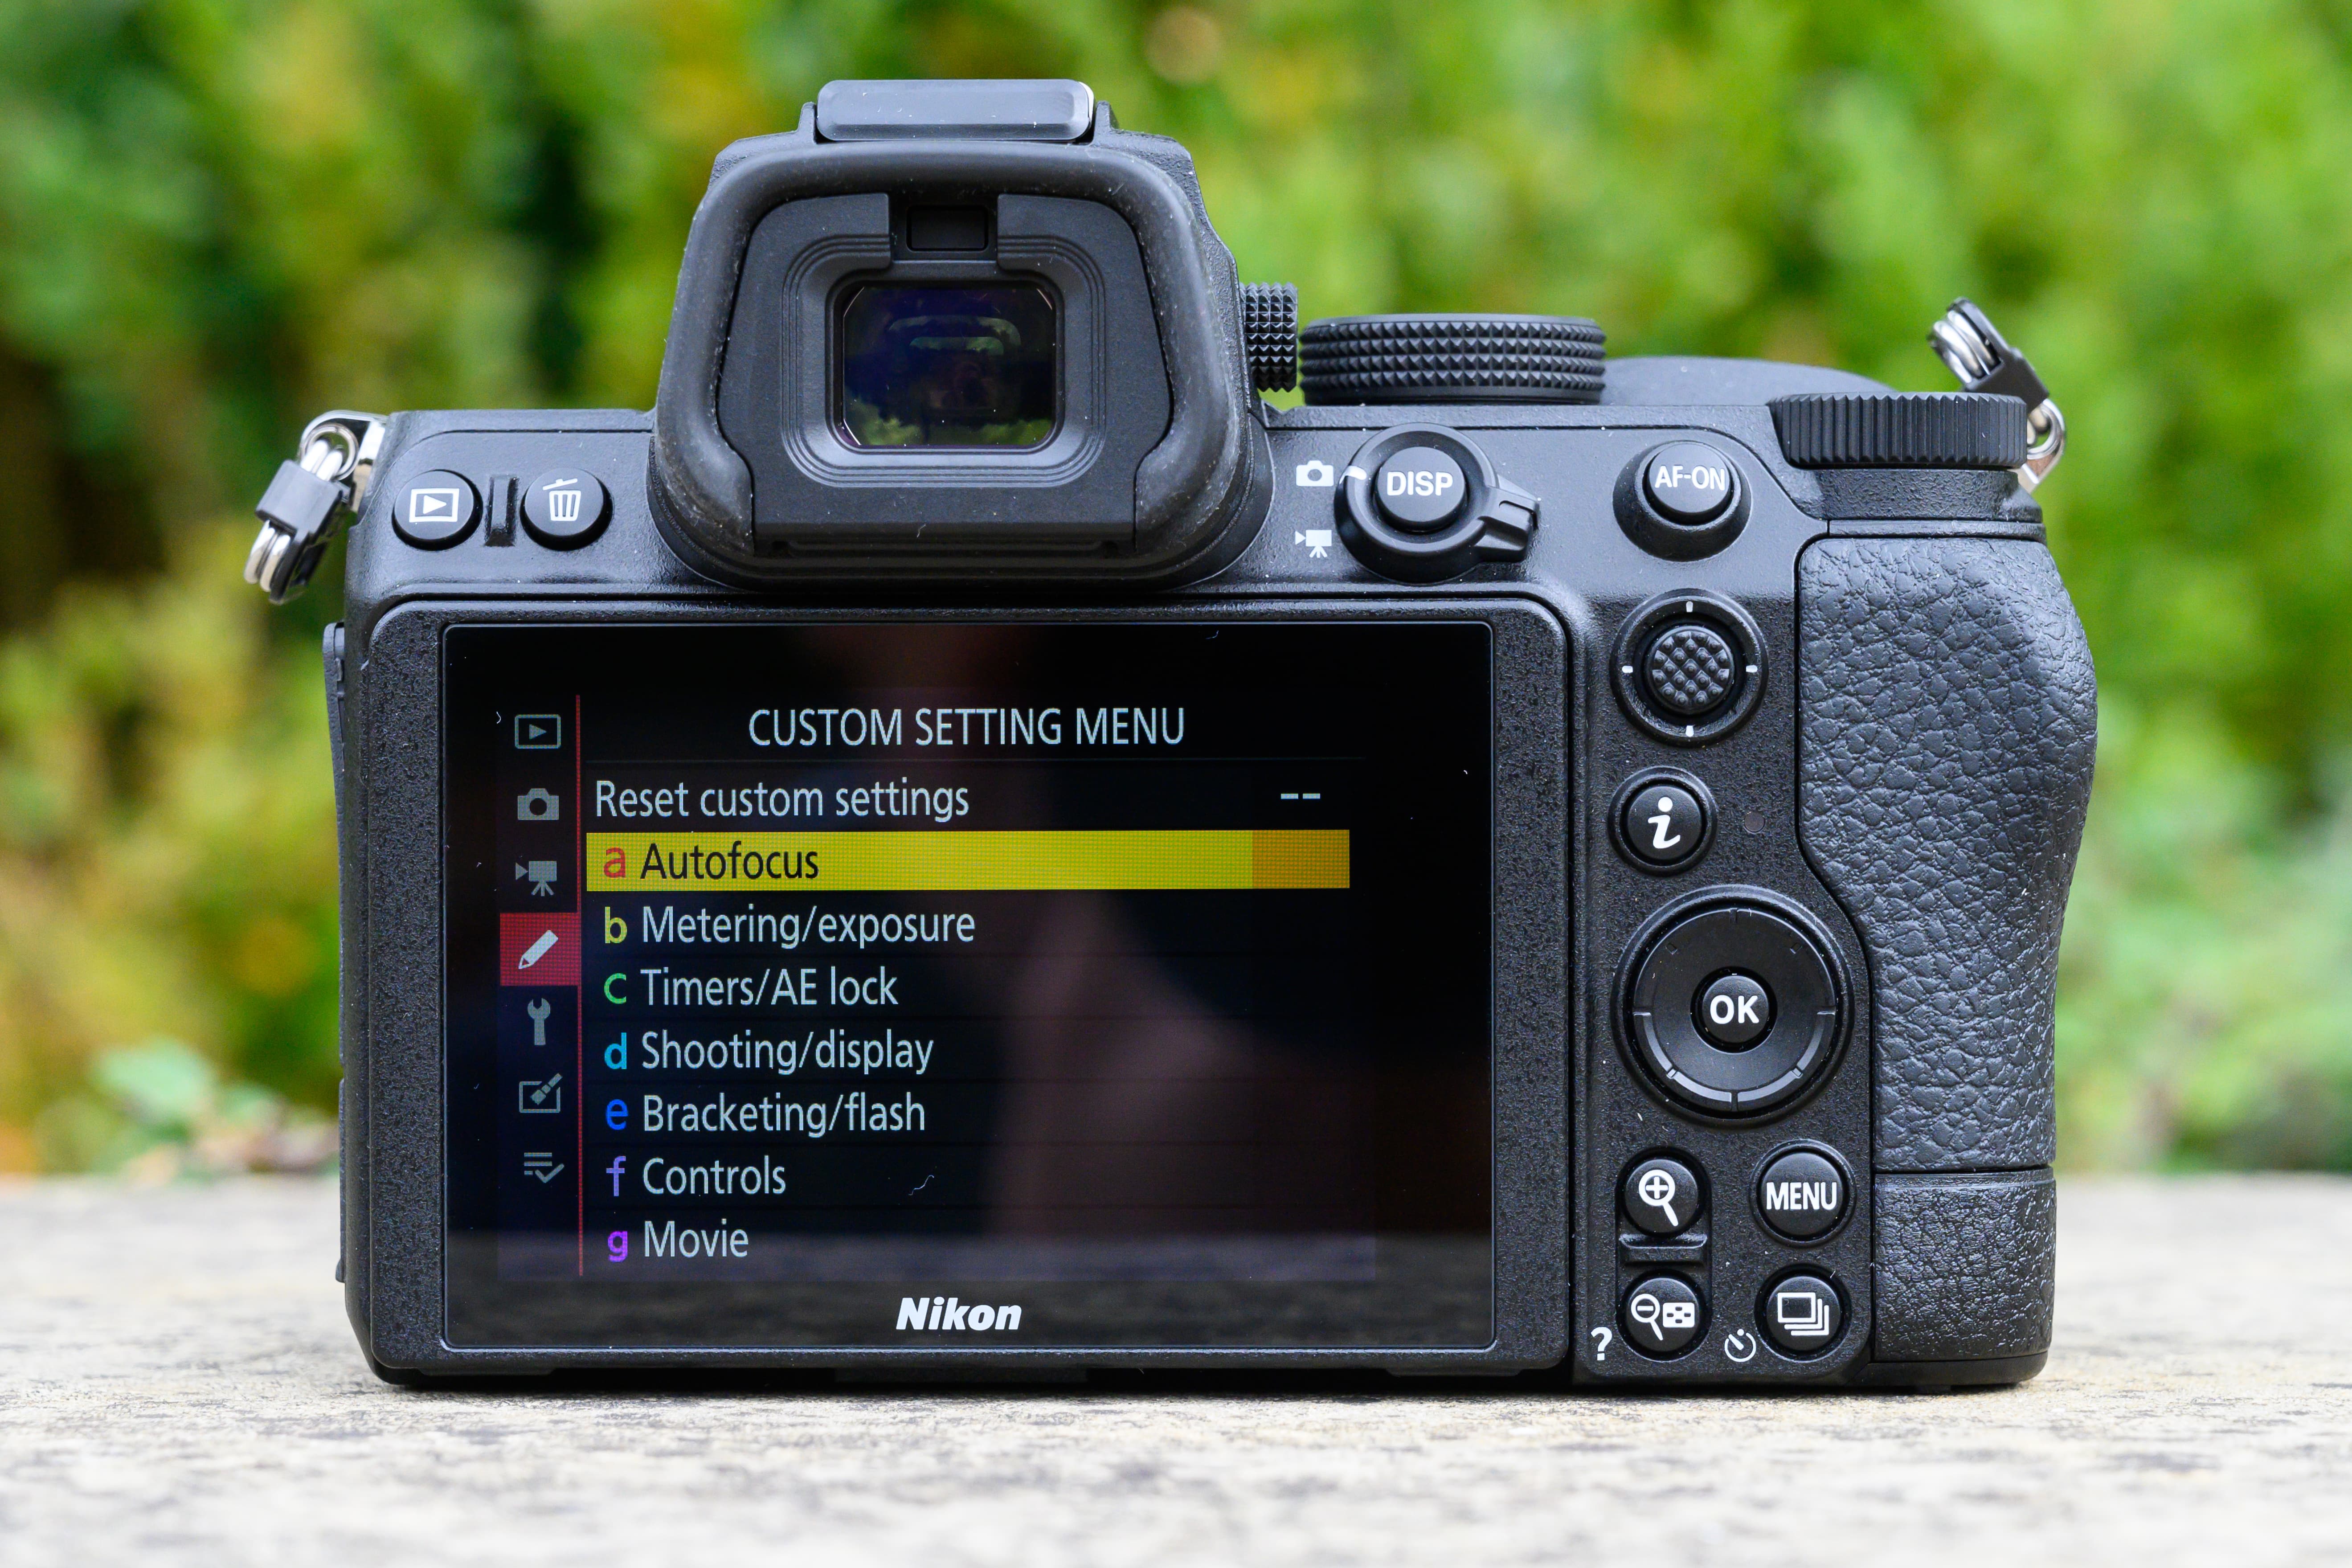 Existing Nikon users will be familiar with the menu, which is very well arranged